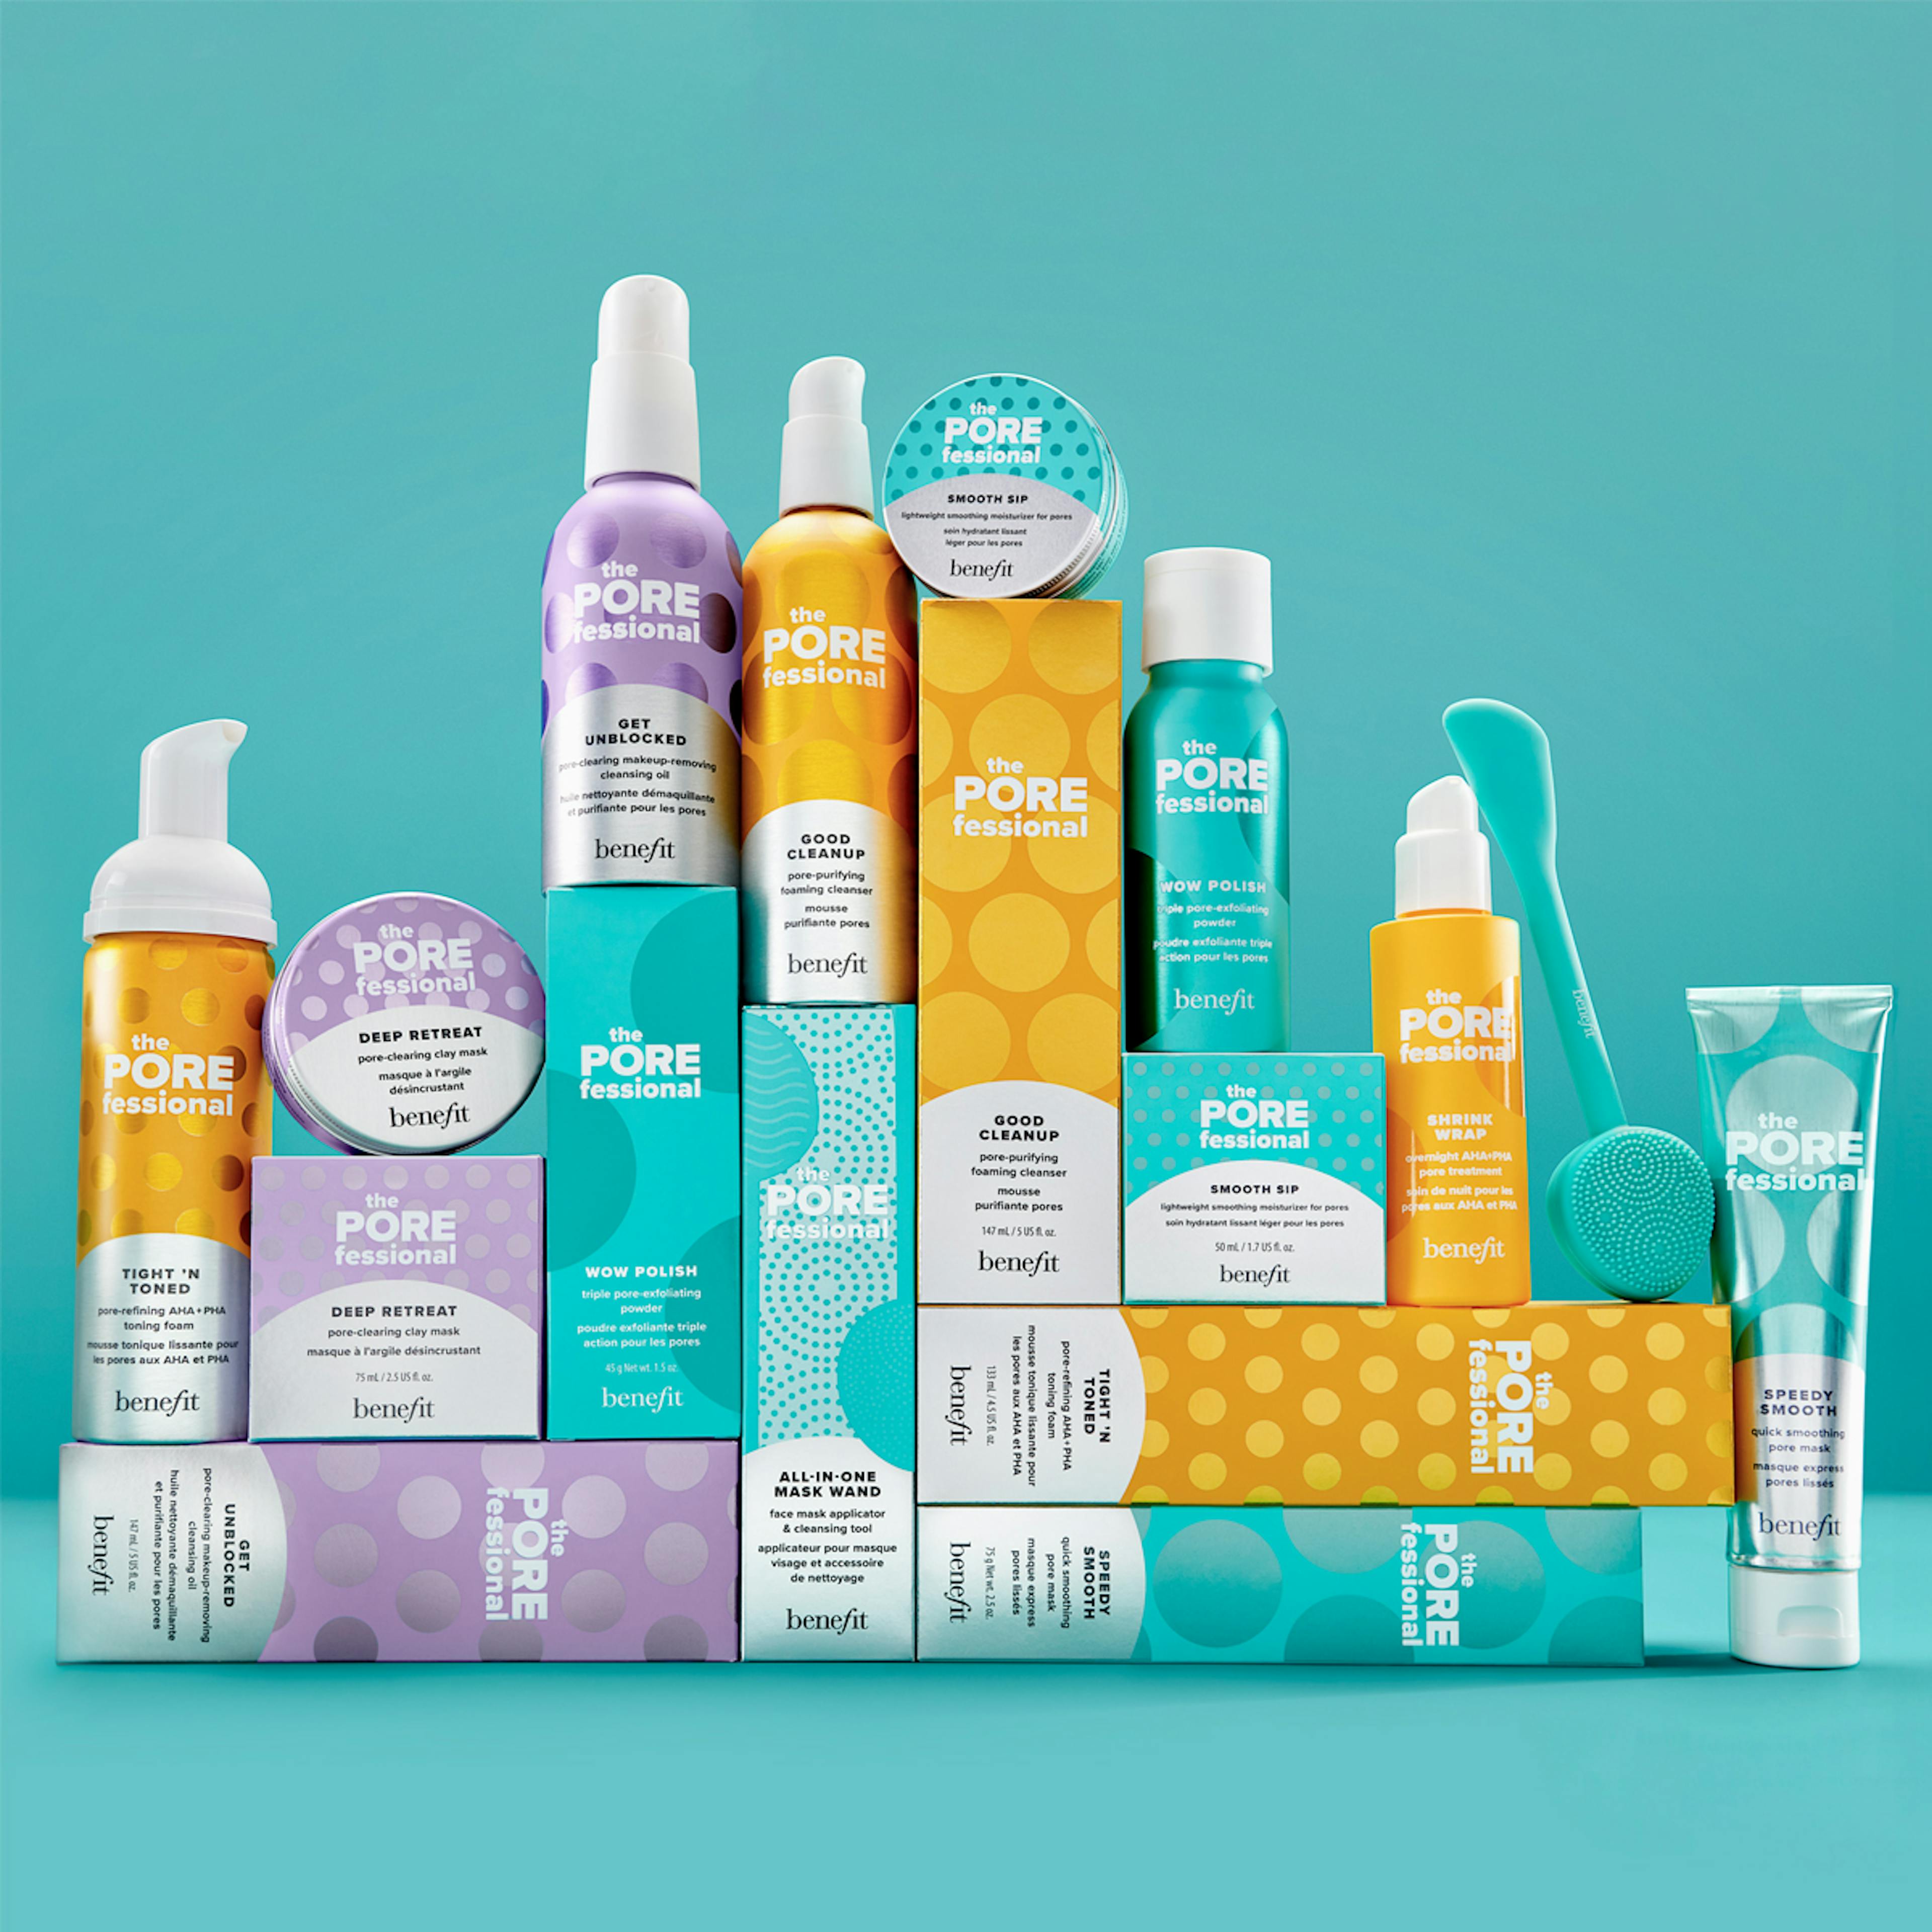 The POREfessional franchise includes high-performing primers, setters & Pore Care.